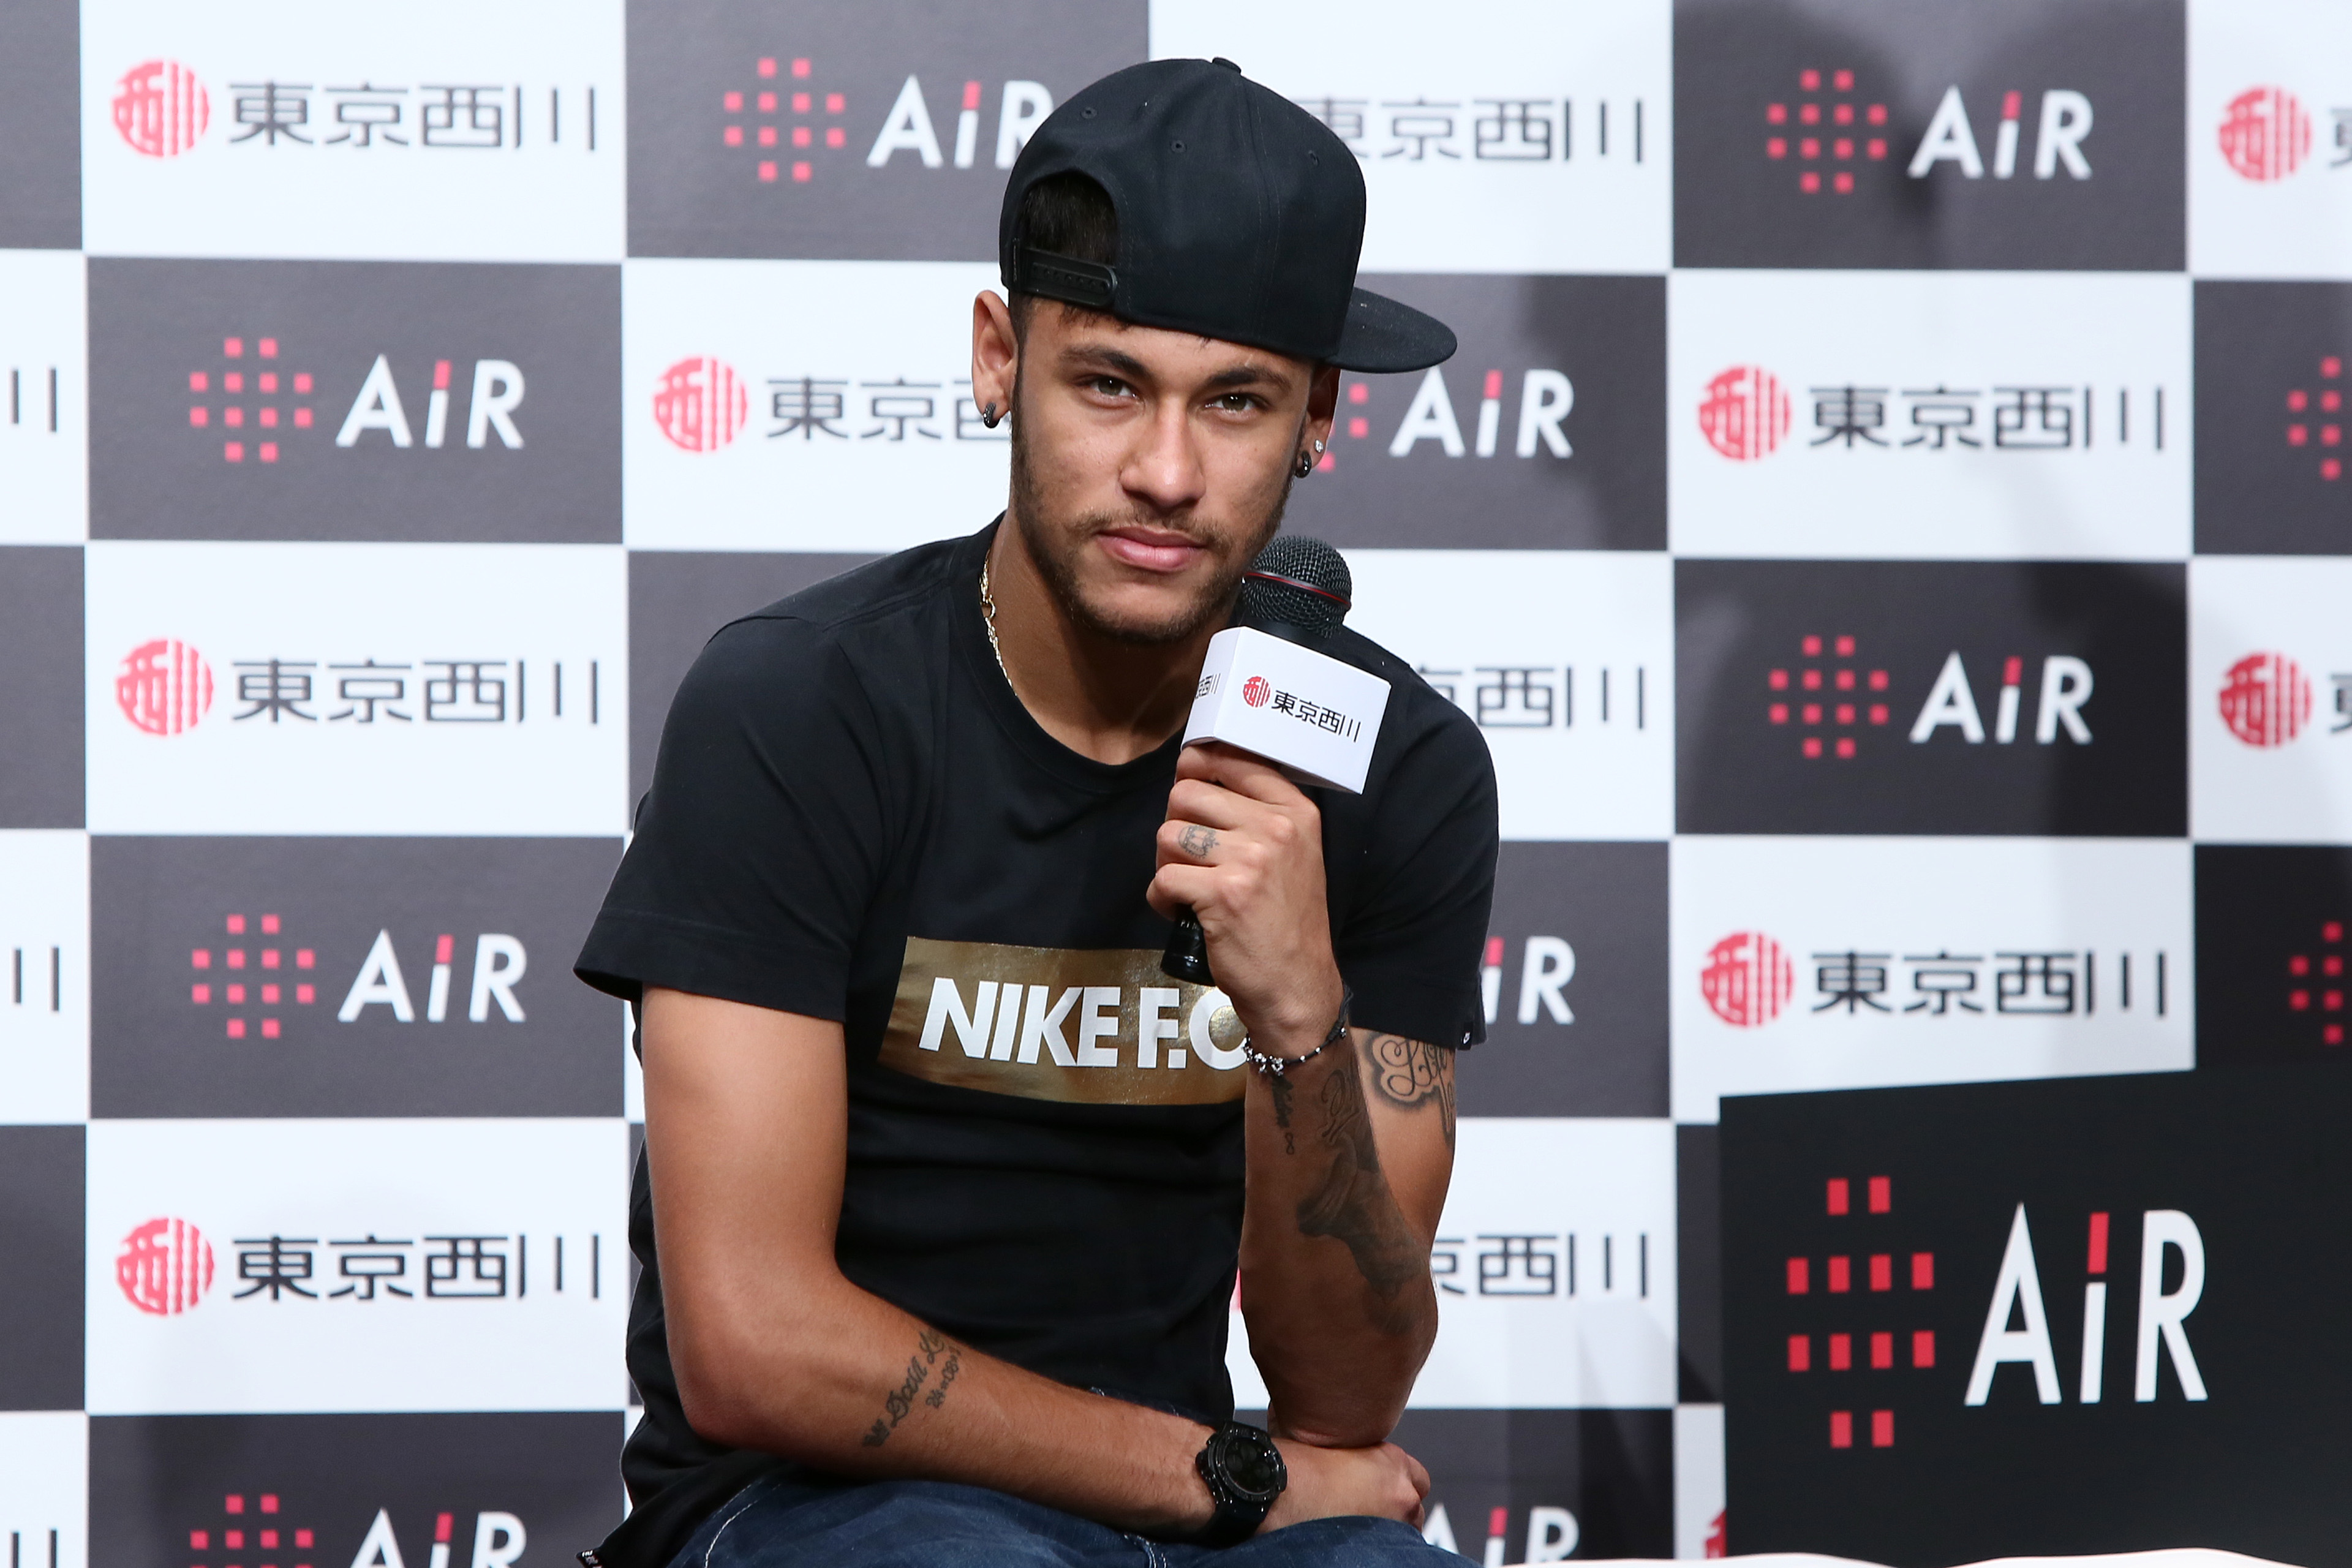 TOKYO, JAPAN - JULY 31:  Neymar da Silva Santos attends the press conference to announce the advertising contract with Nishikawa Sangyo Co. on July 31, 2014 in Tokyo, Japan. Neymar will appear in ads for Nishikawa's 'AiR' mattresses designed for athletes.  (Photo by Ken Ishii/Getty Images)